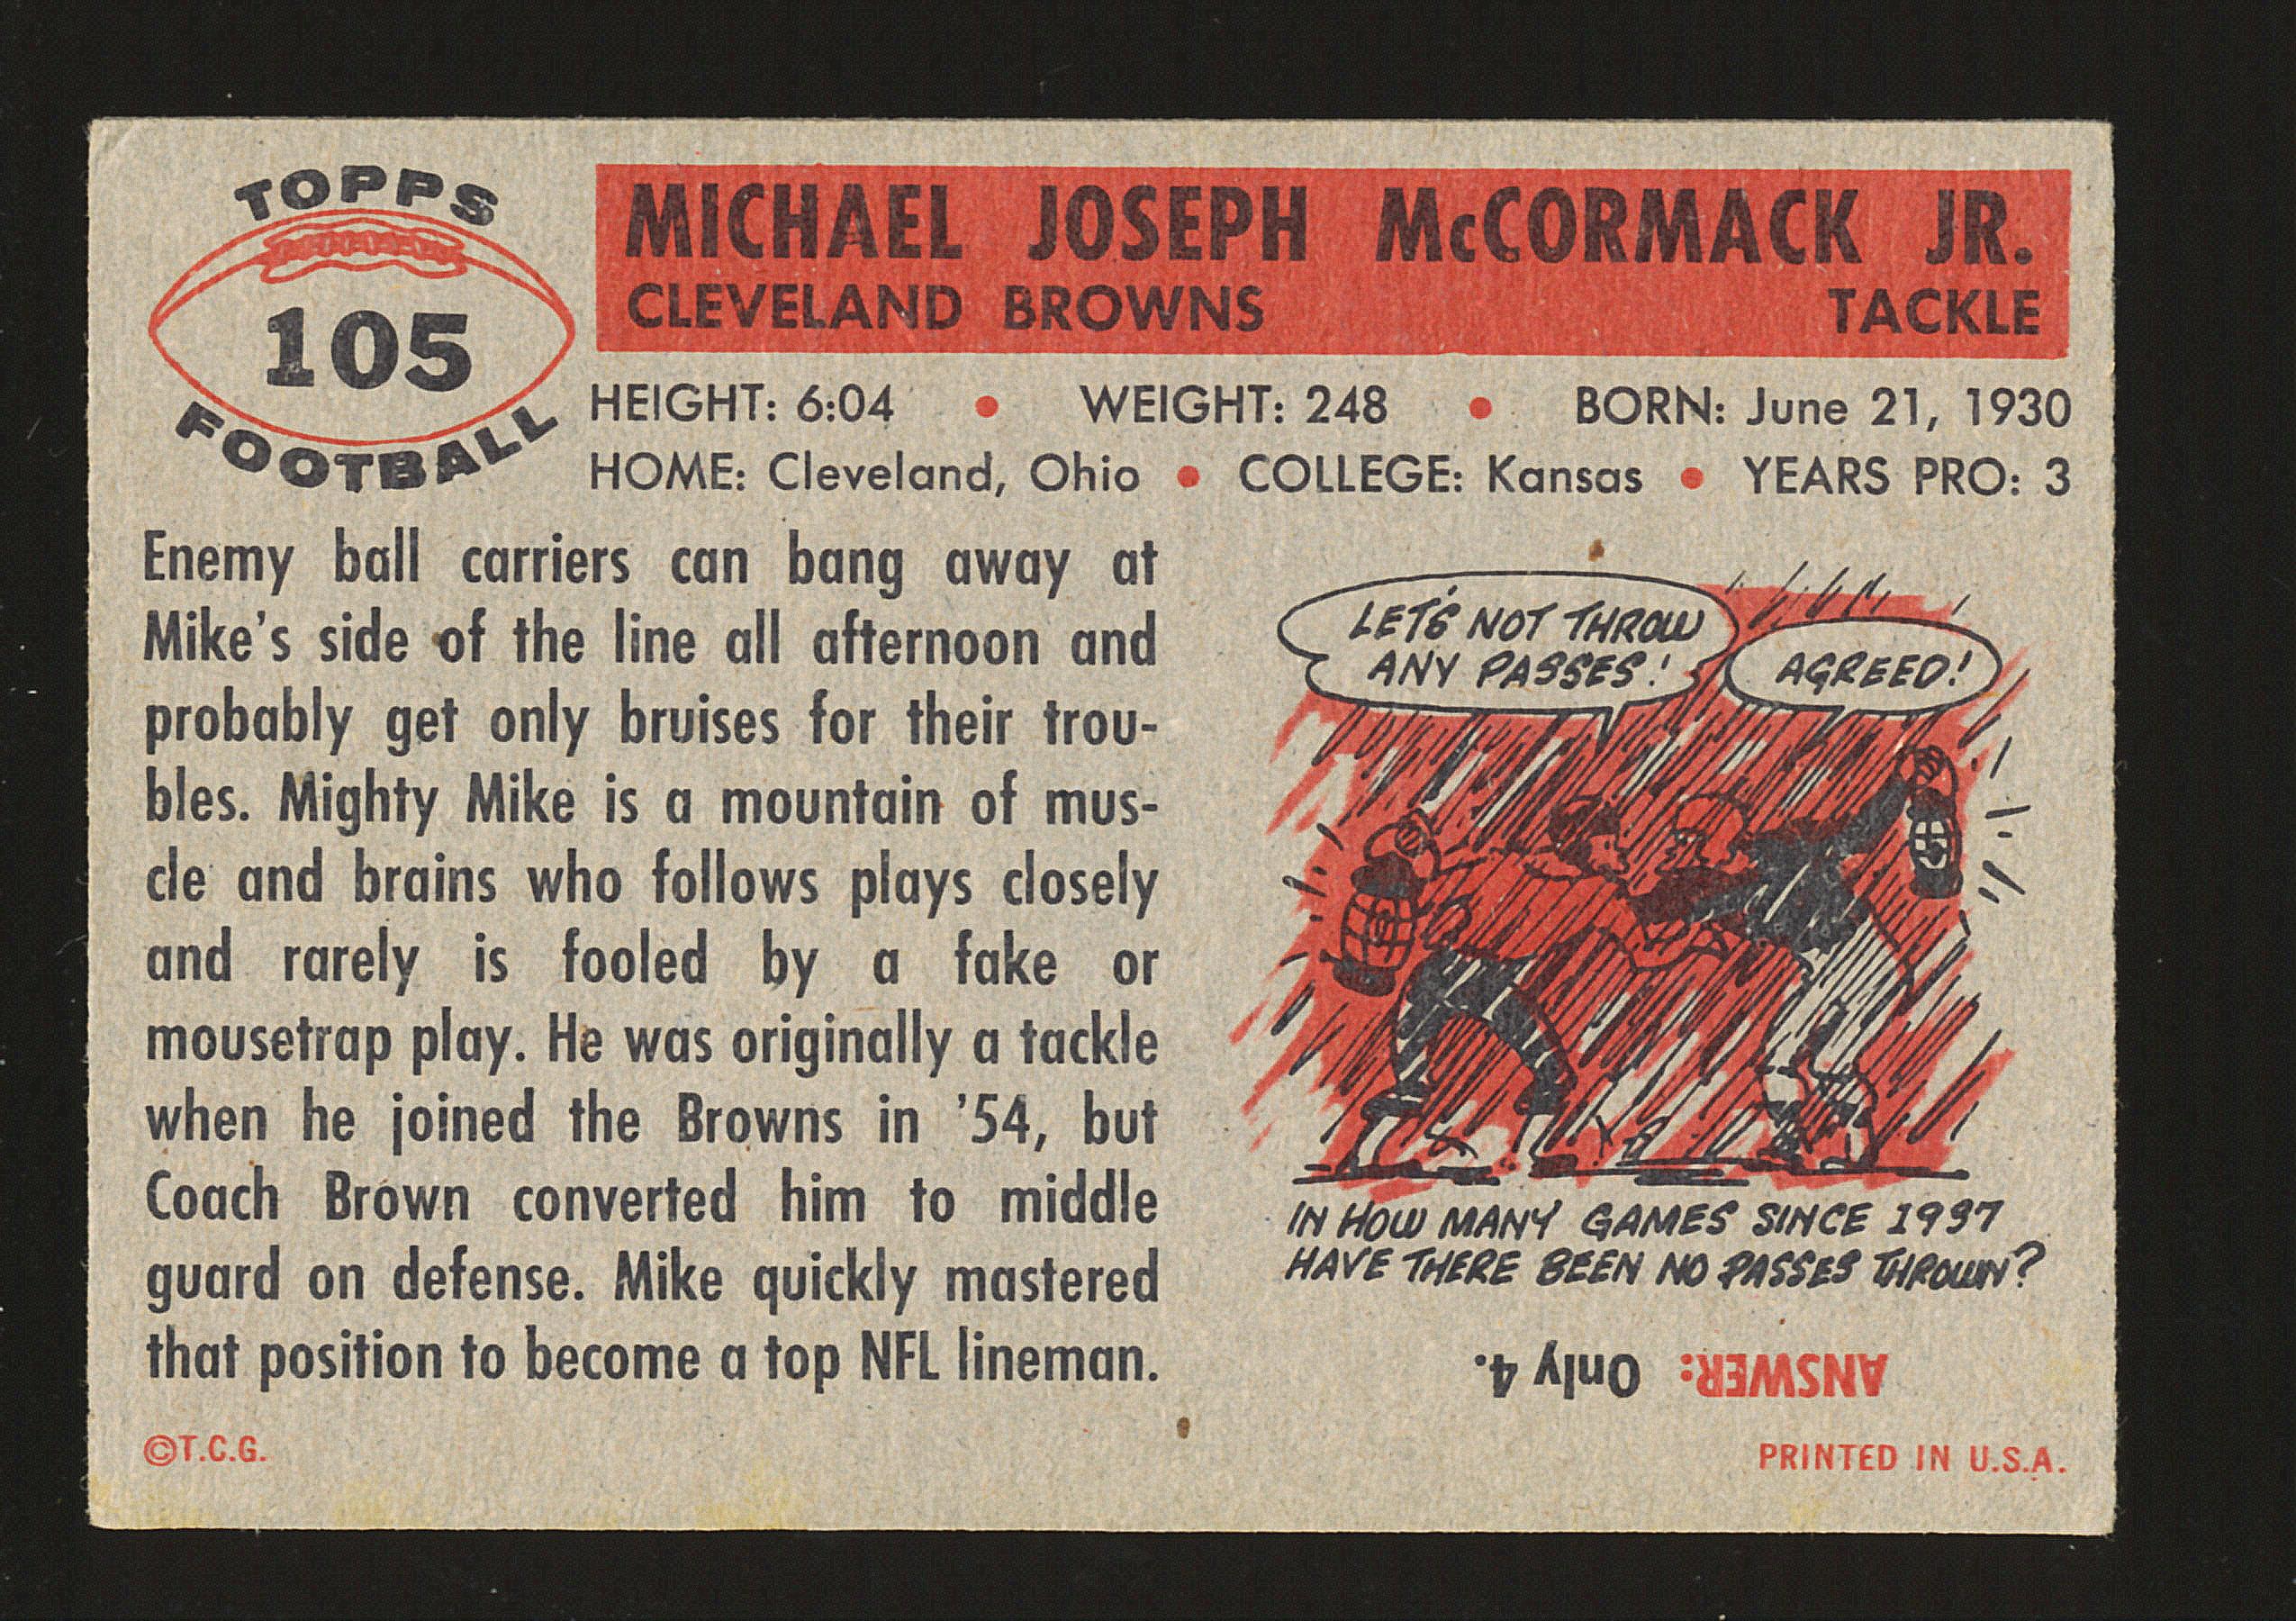 1956 Bowman Football Card #105 Hall of Famer Mike McCormick Cleveland Brown